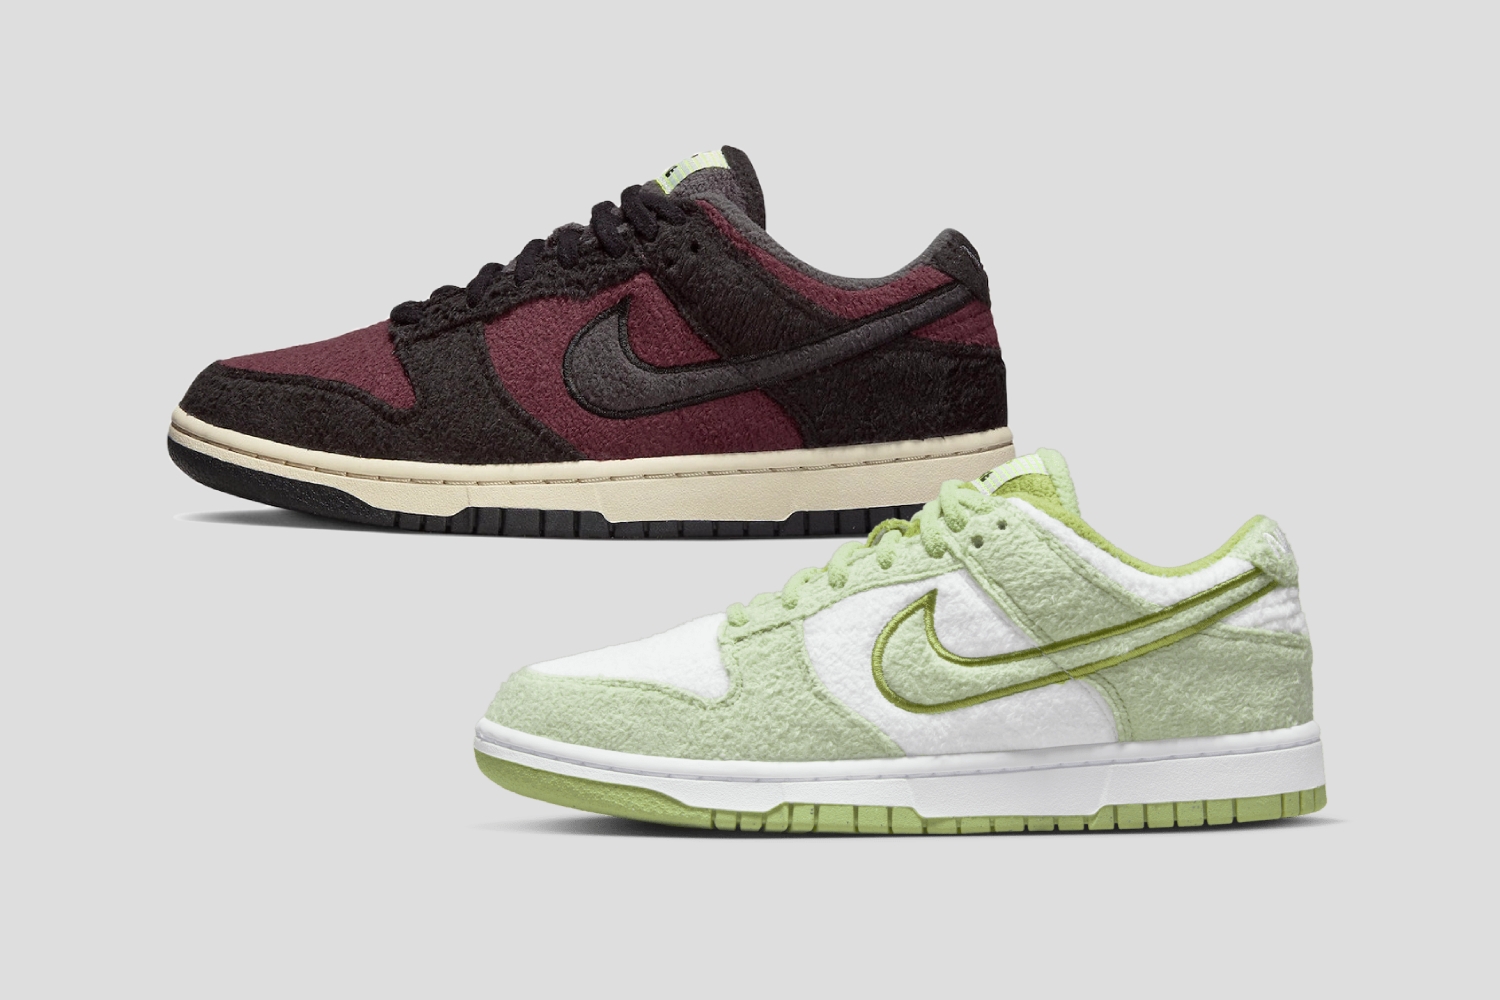 Official images of the Nike Dunk Low 'Fleece' pack